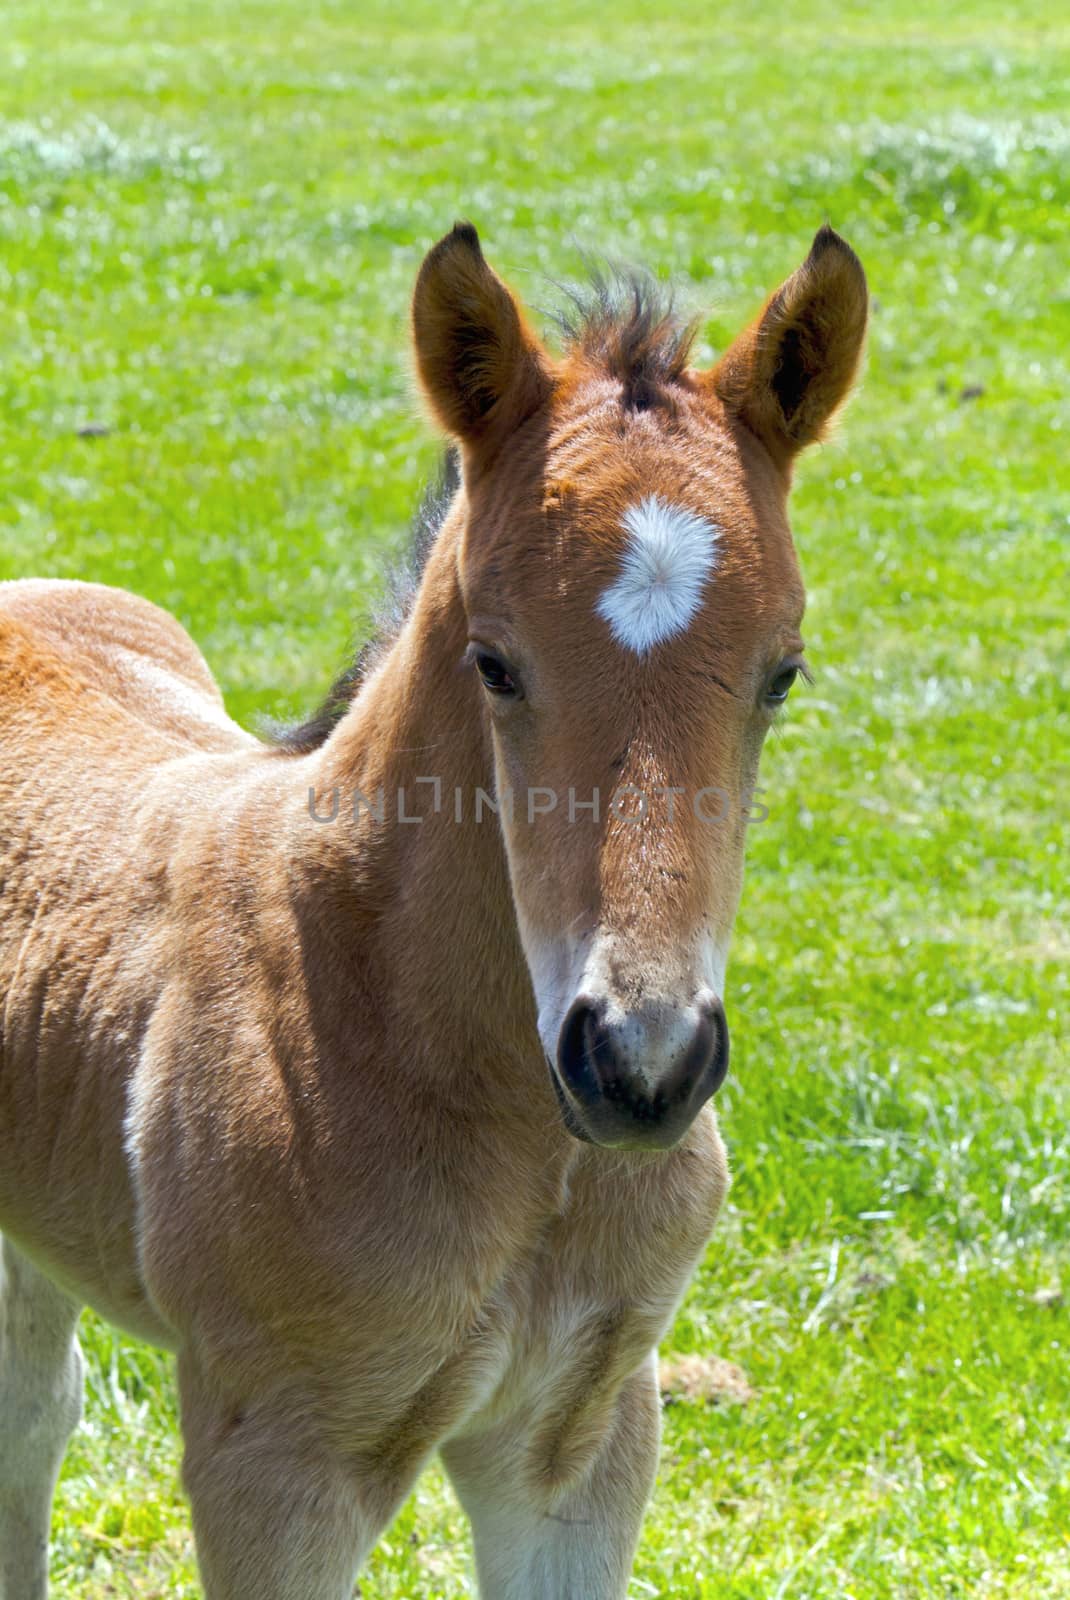 A Young Horse Foal Looks at the Camera in Front of the Mare